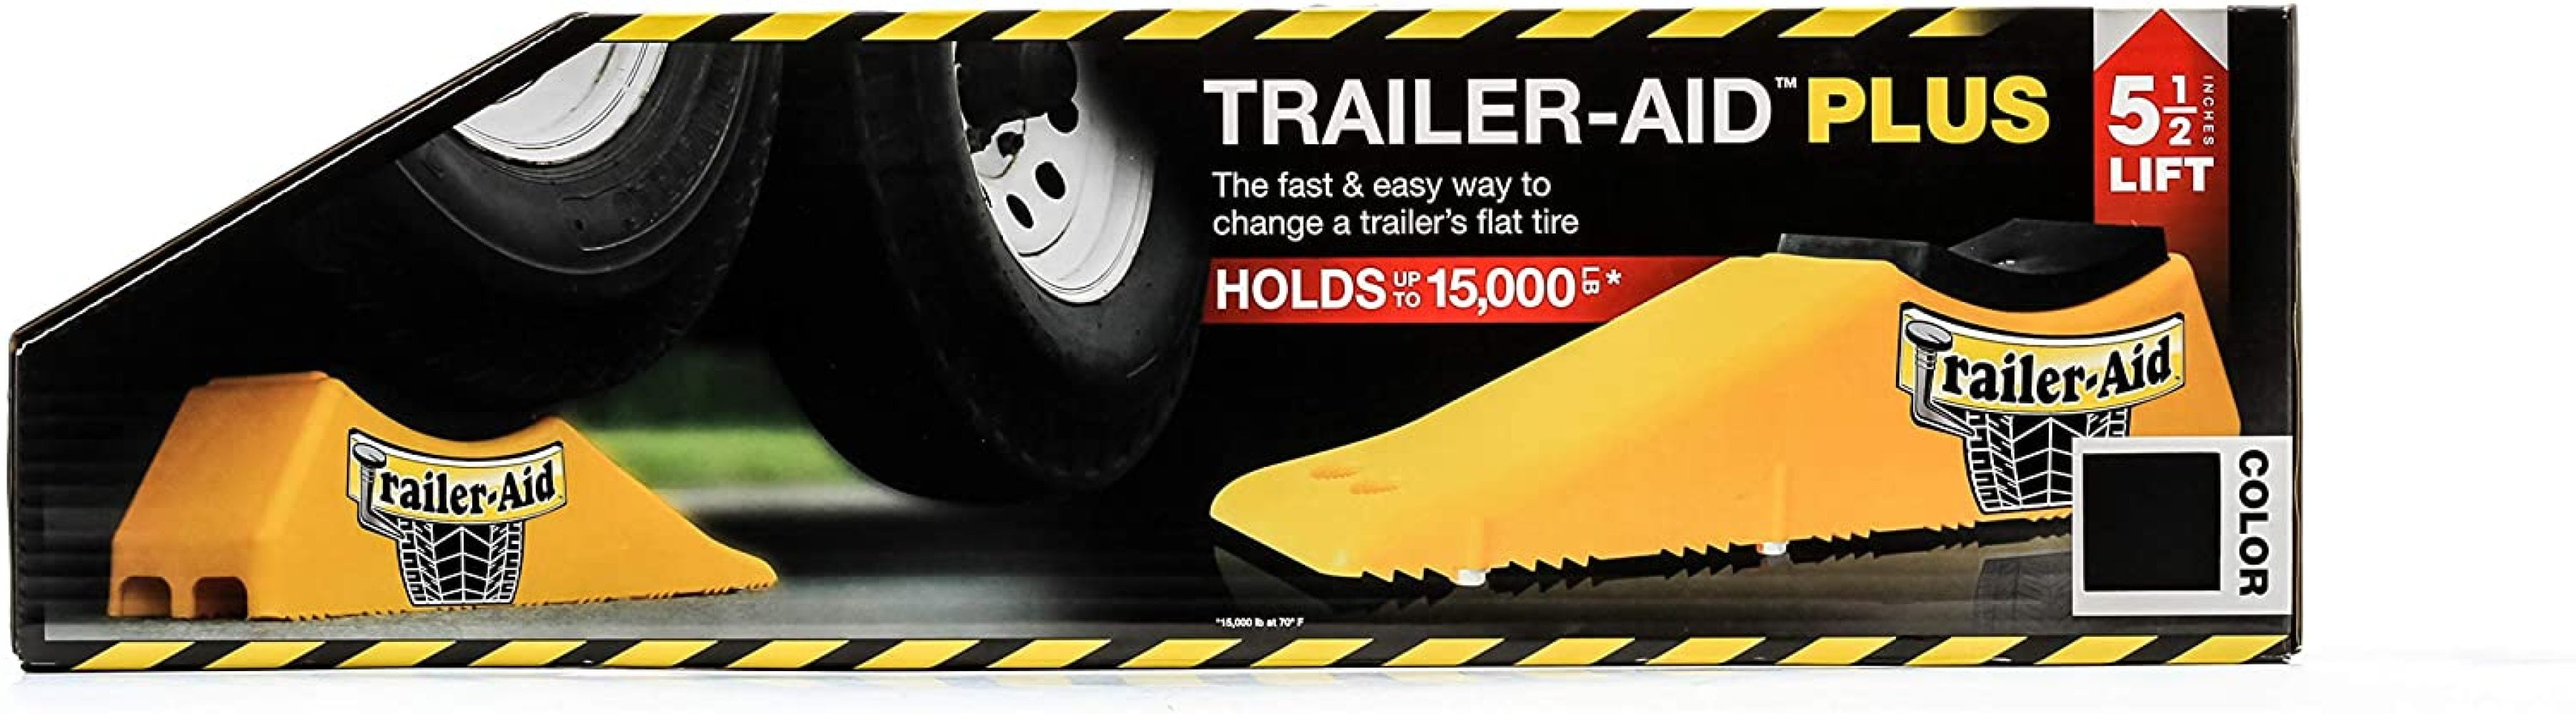 4.5 Inch Lift Holds up to 15,000 Pounds Trailer-Aid Tandem Tire Changing Ramp The Fast and Easy Way To Change A Trailers Flat Tire Black 